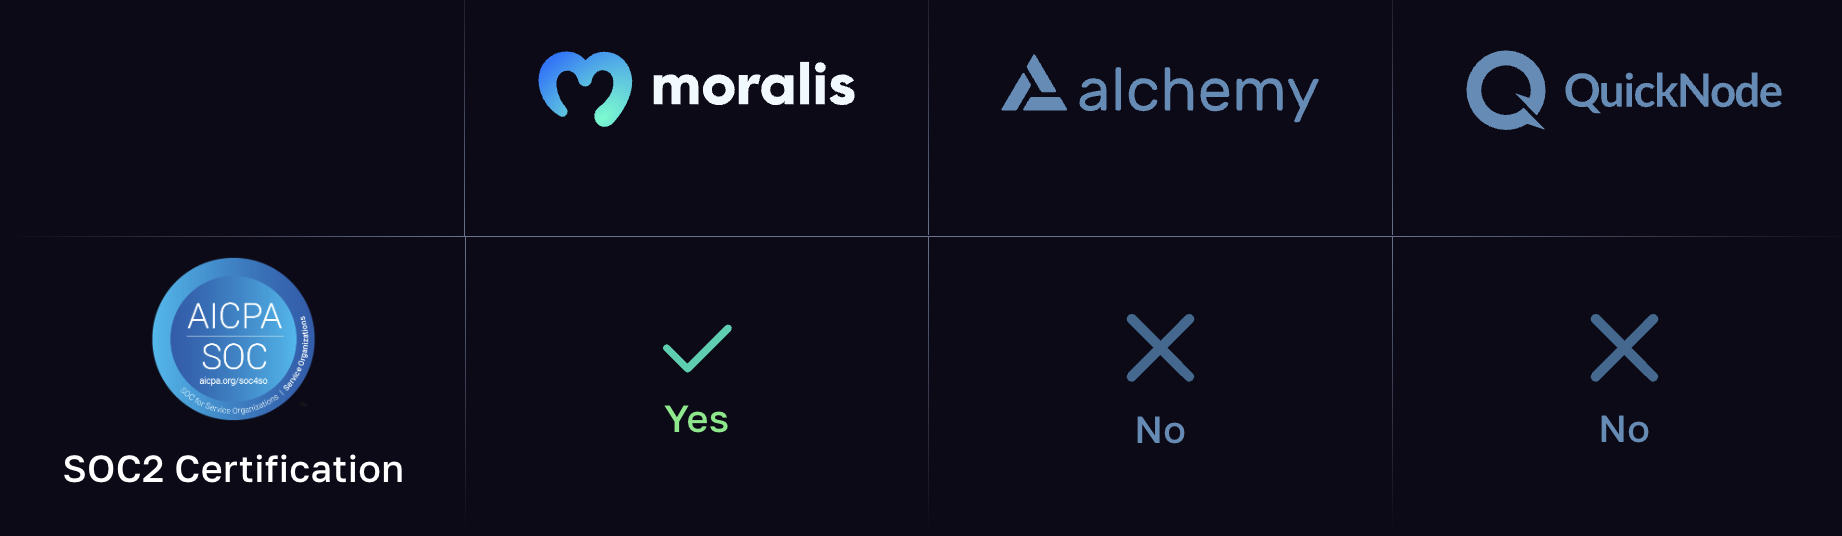 Comparing Moralis, Alchemy, and QuickNode to build on the Moonbeam network